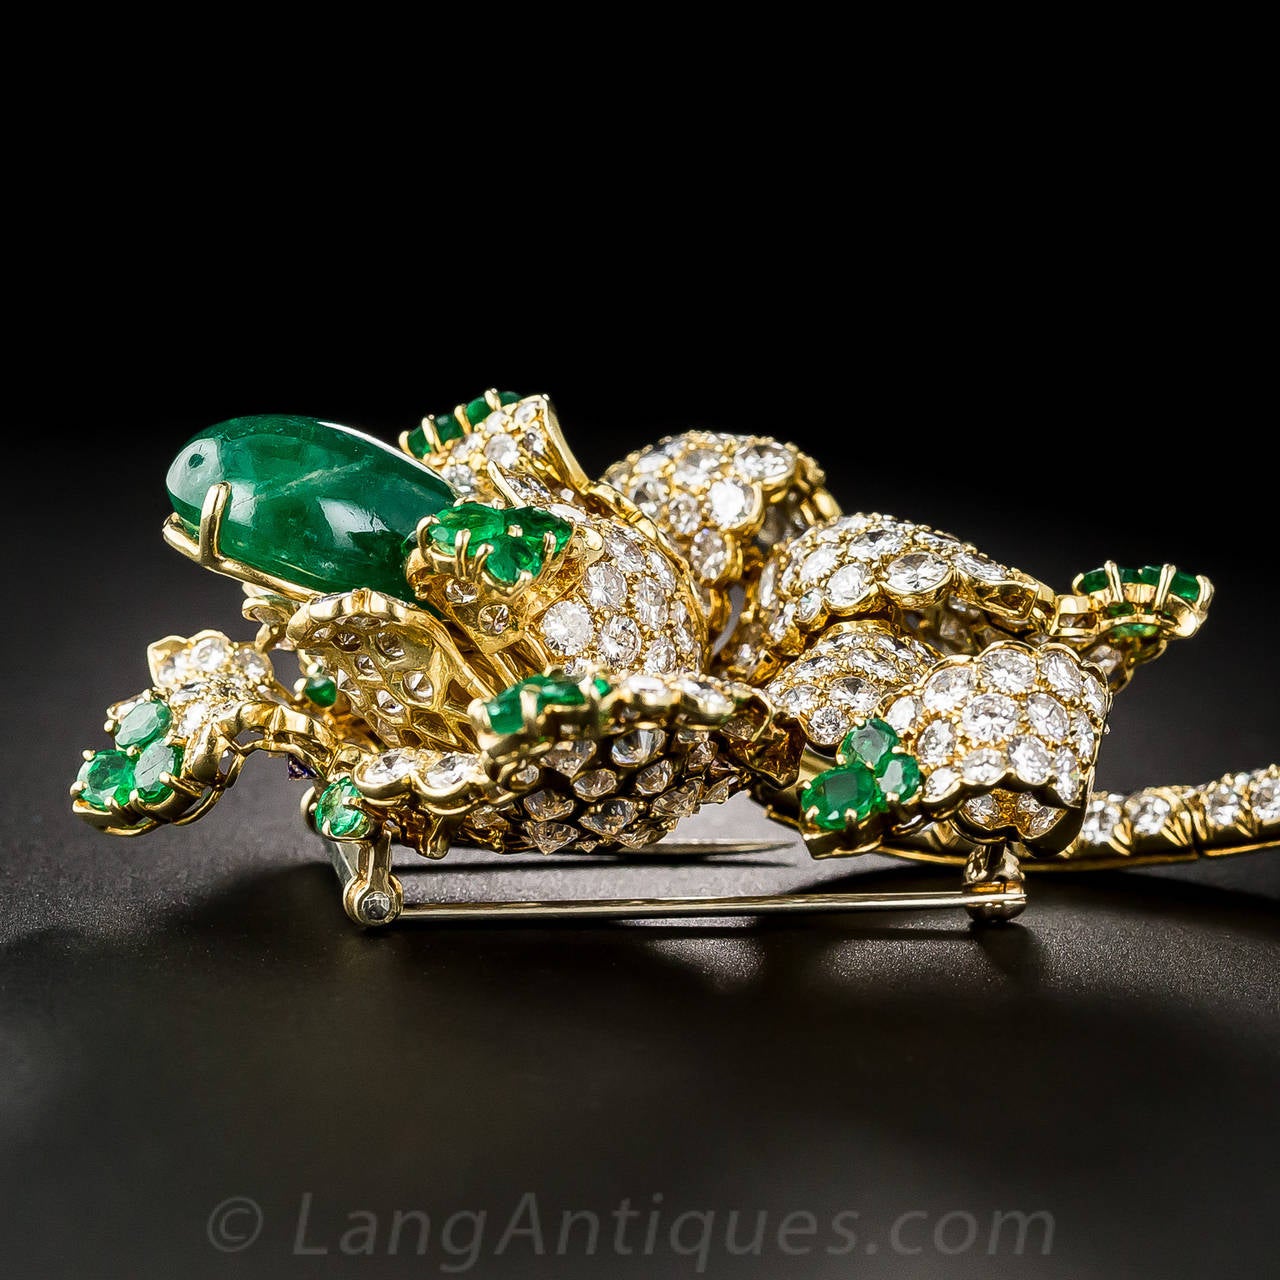 Spectacular 12 Carat Cabochon Emerald Diamond Gold Flower Brooch For Sale 3